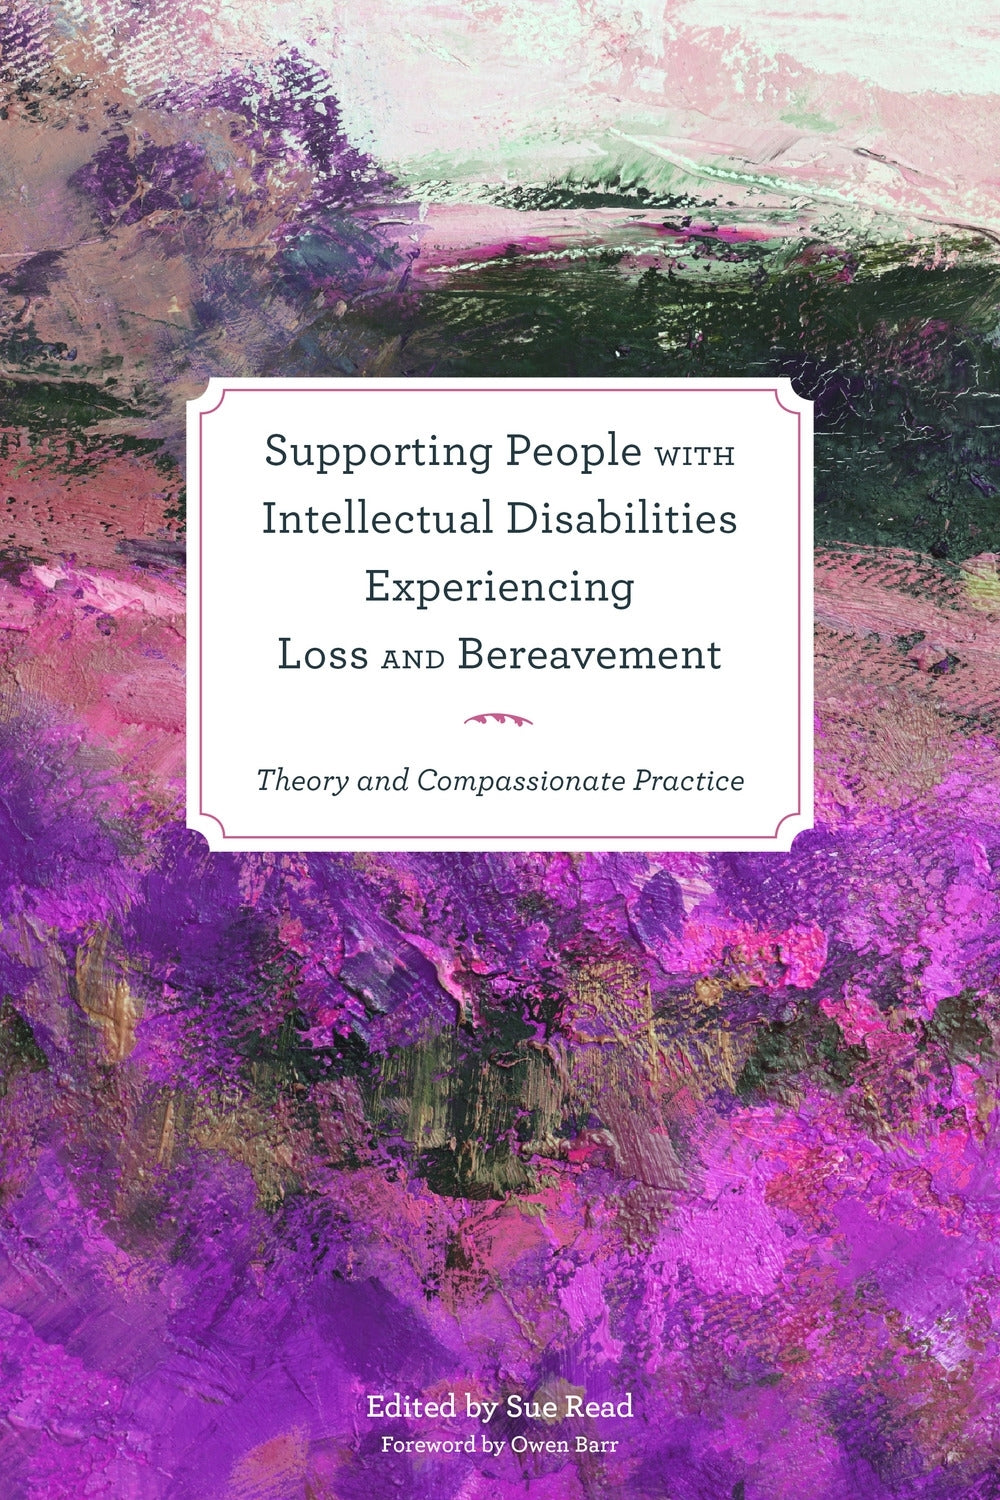 Supporting People with Intellectual Disabilities Experiencing Loss and Bereavement by Sue Read, Owen Barr, No Author Listed